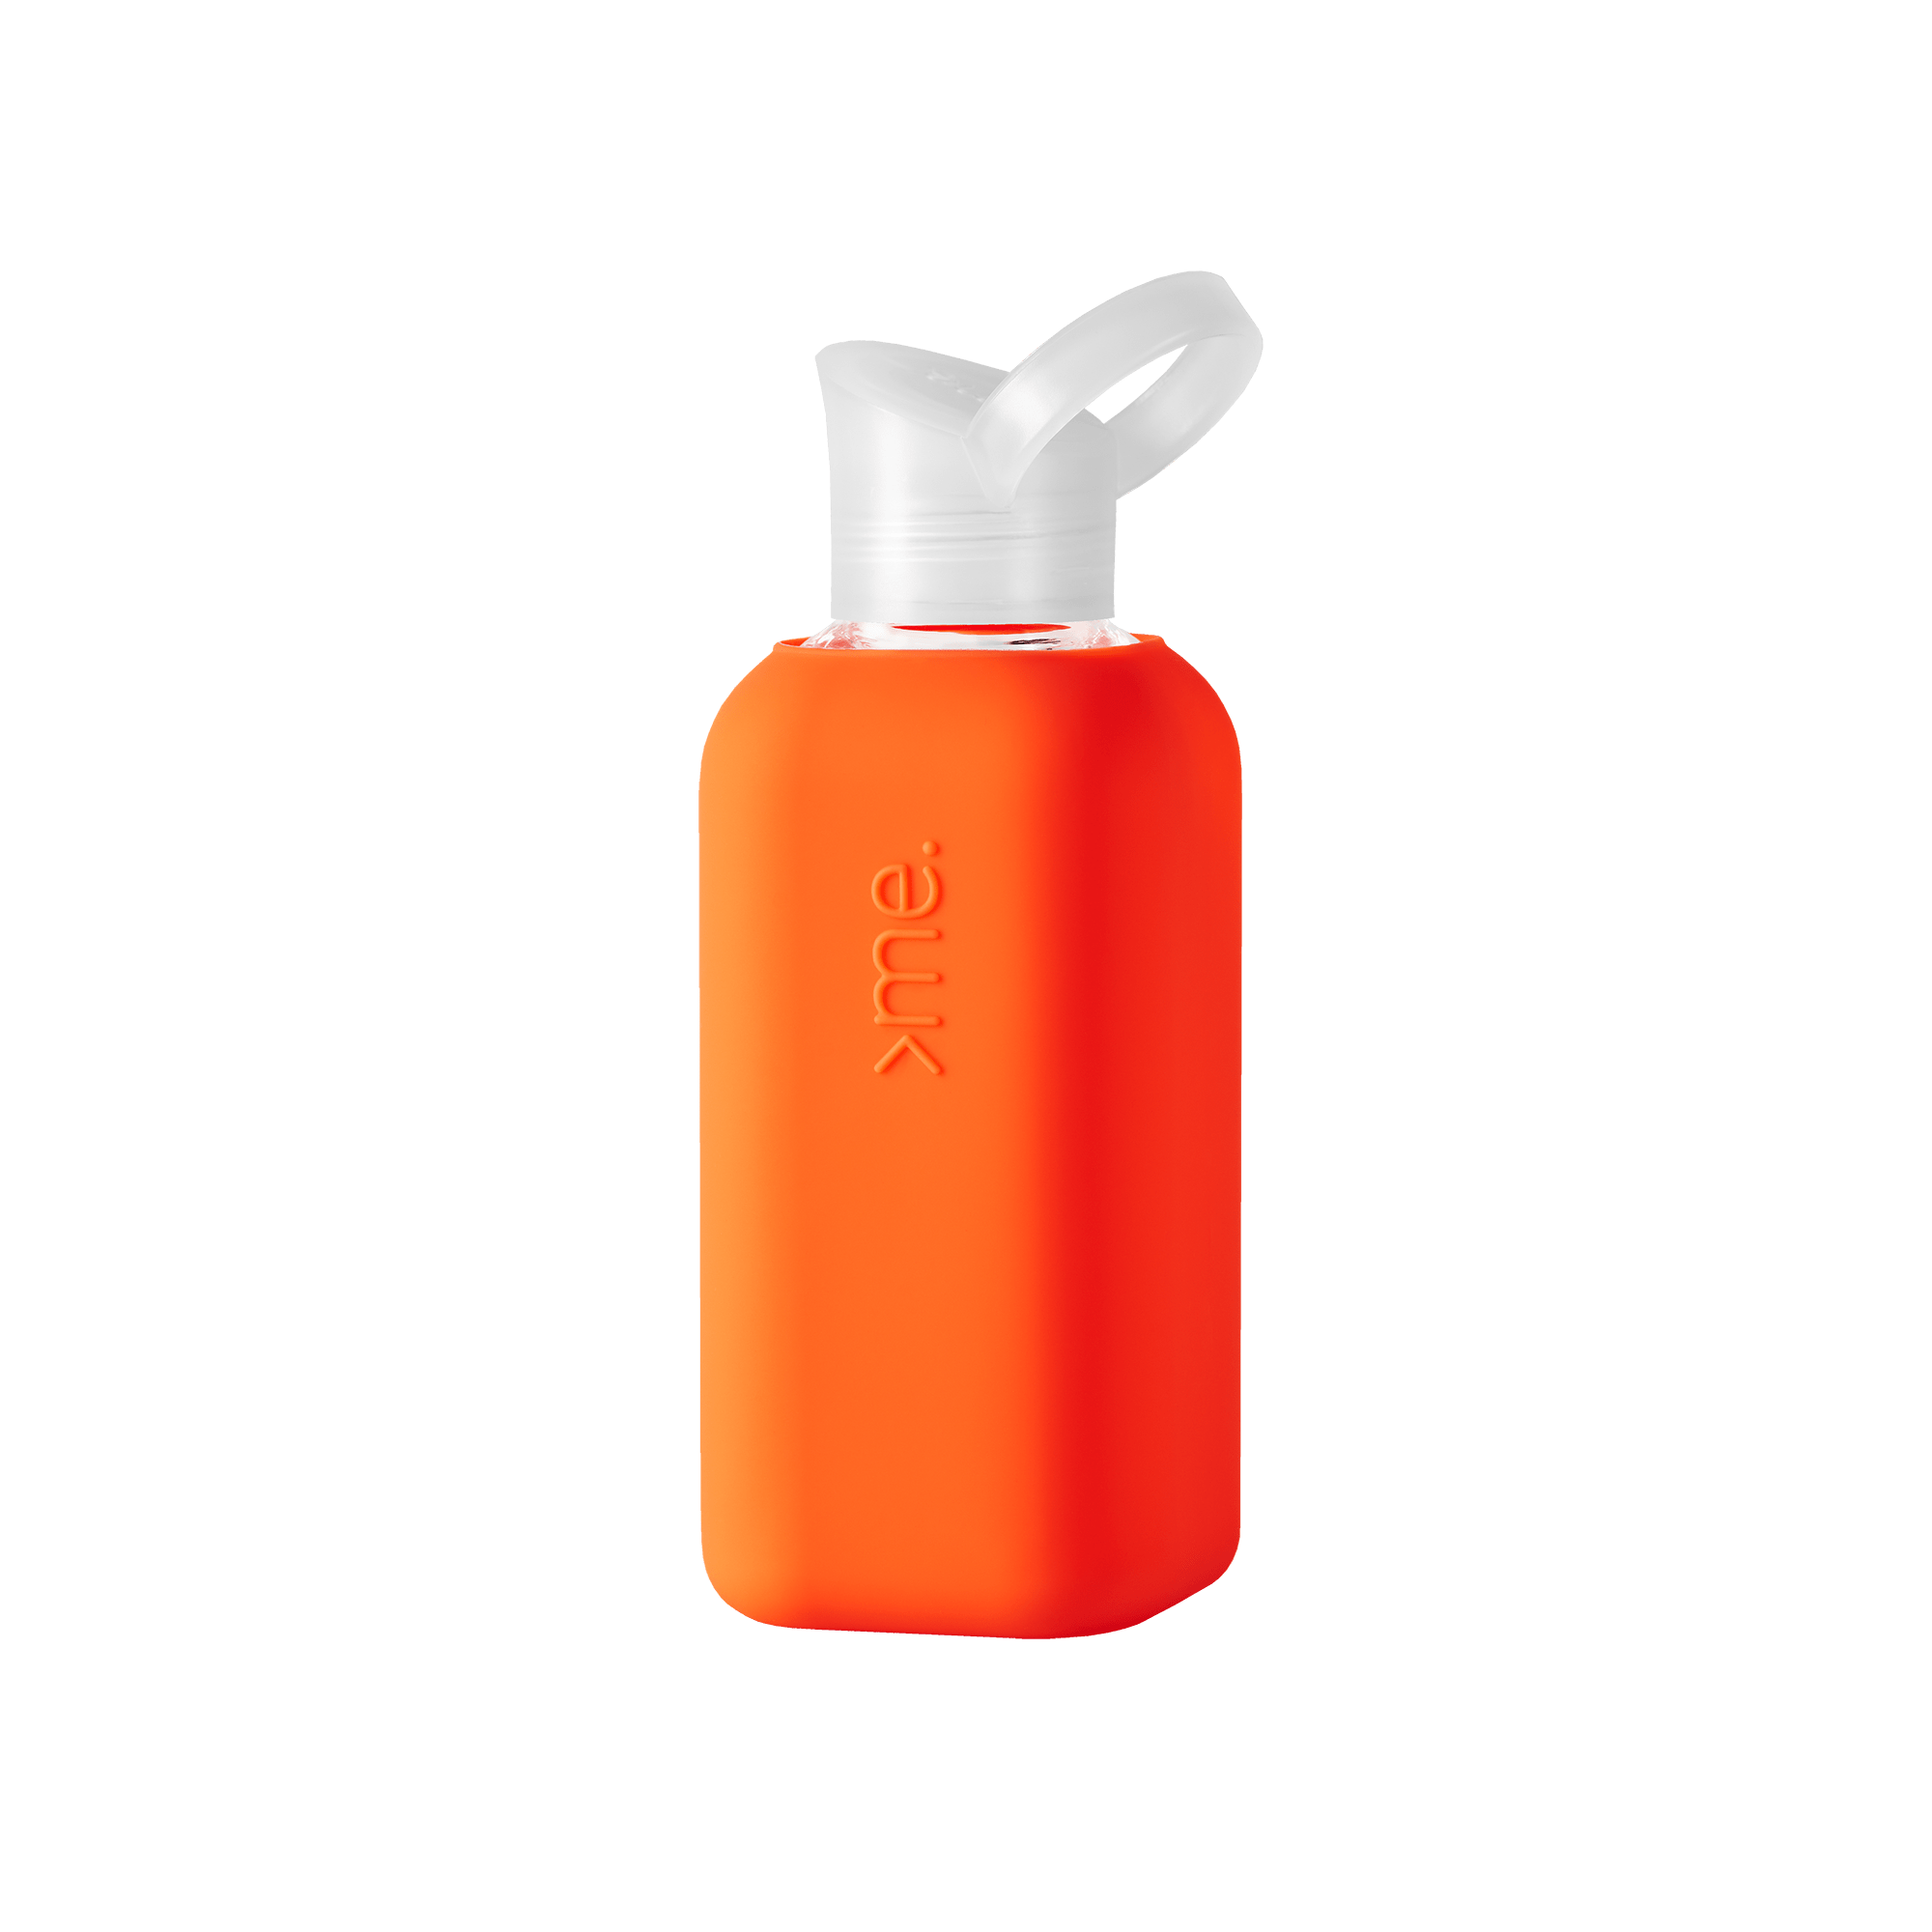 Squireme Glass Bottle with Silicone Sleeve.